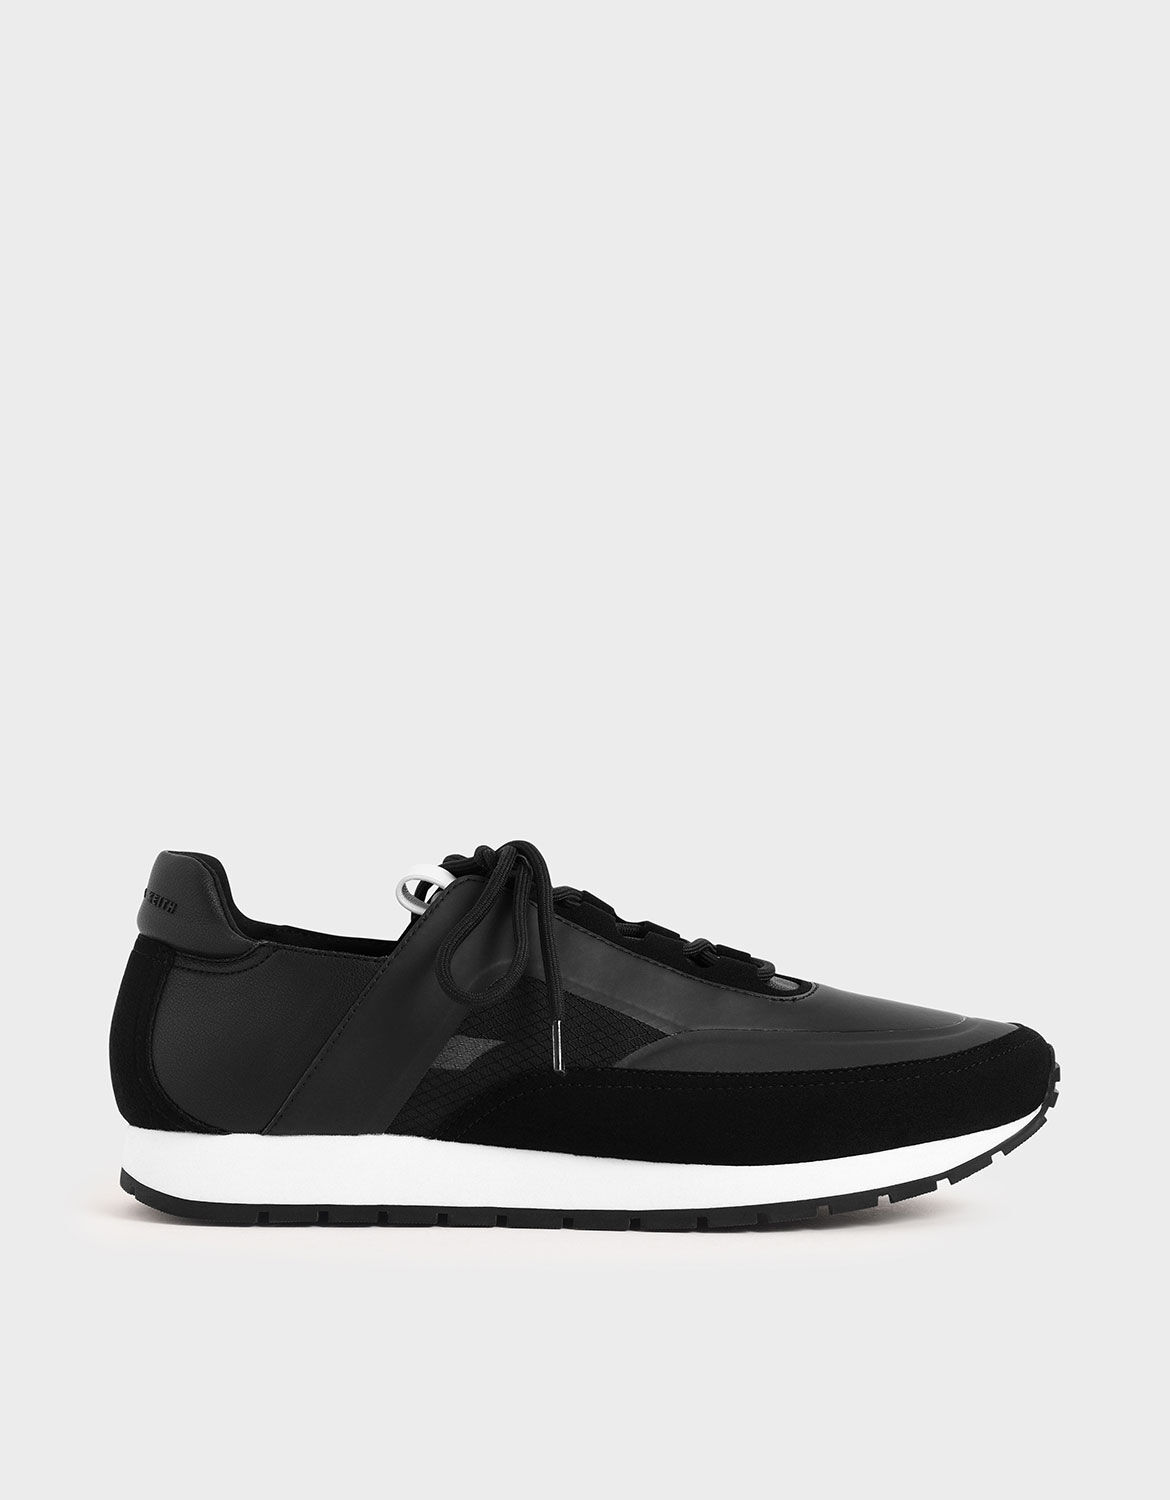 Black Lace-Up Trainers | CHARLES \u0026 KEITH PH